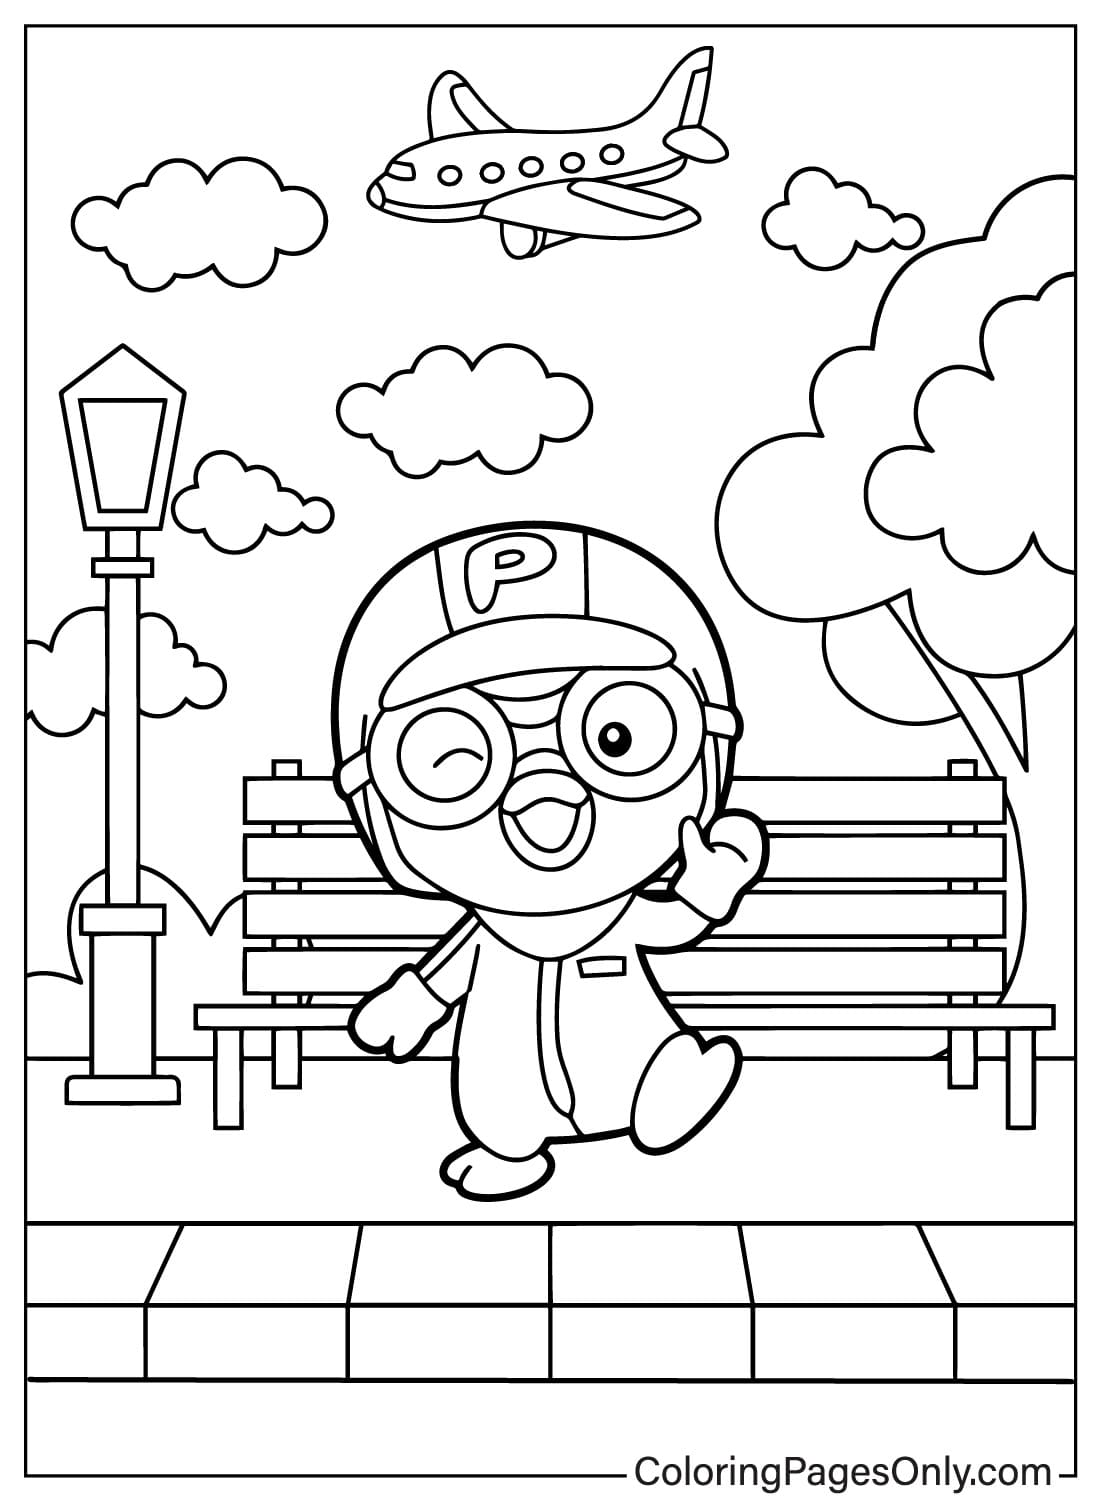 Pororo Coloring Page from Pororo the Little Penguin